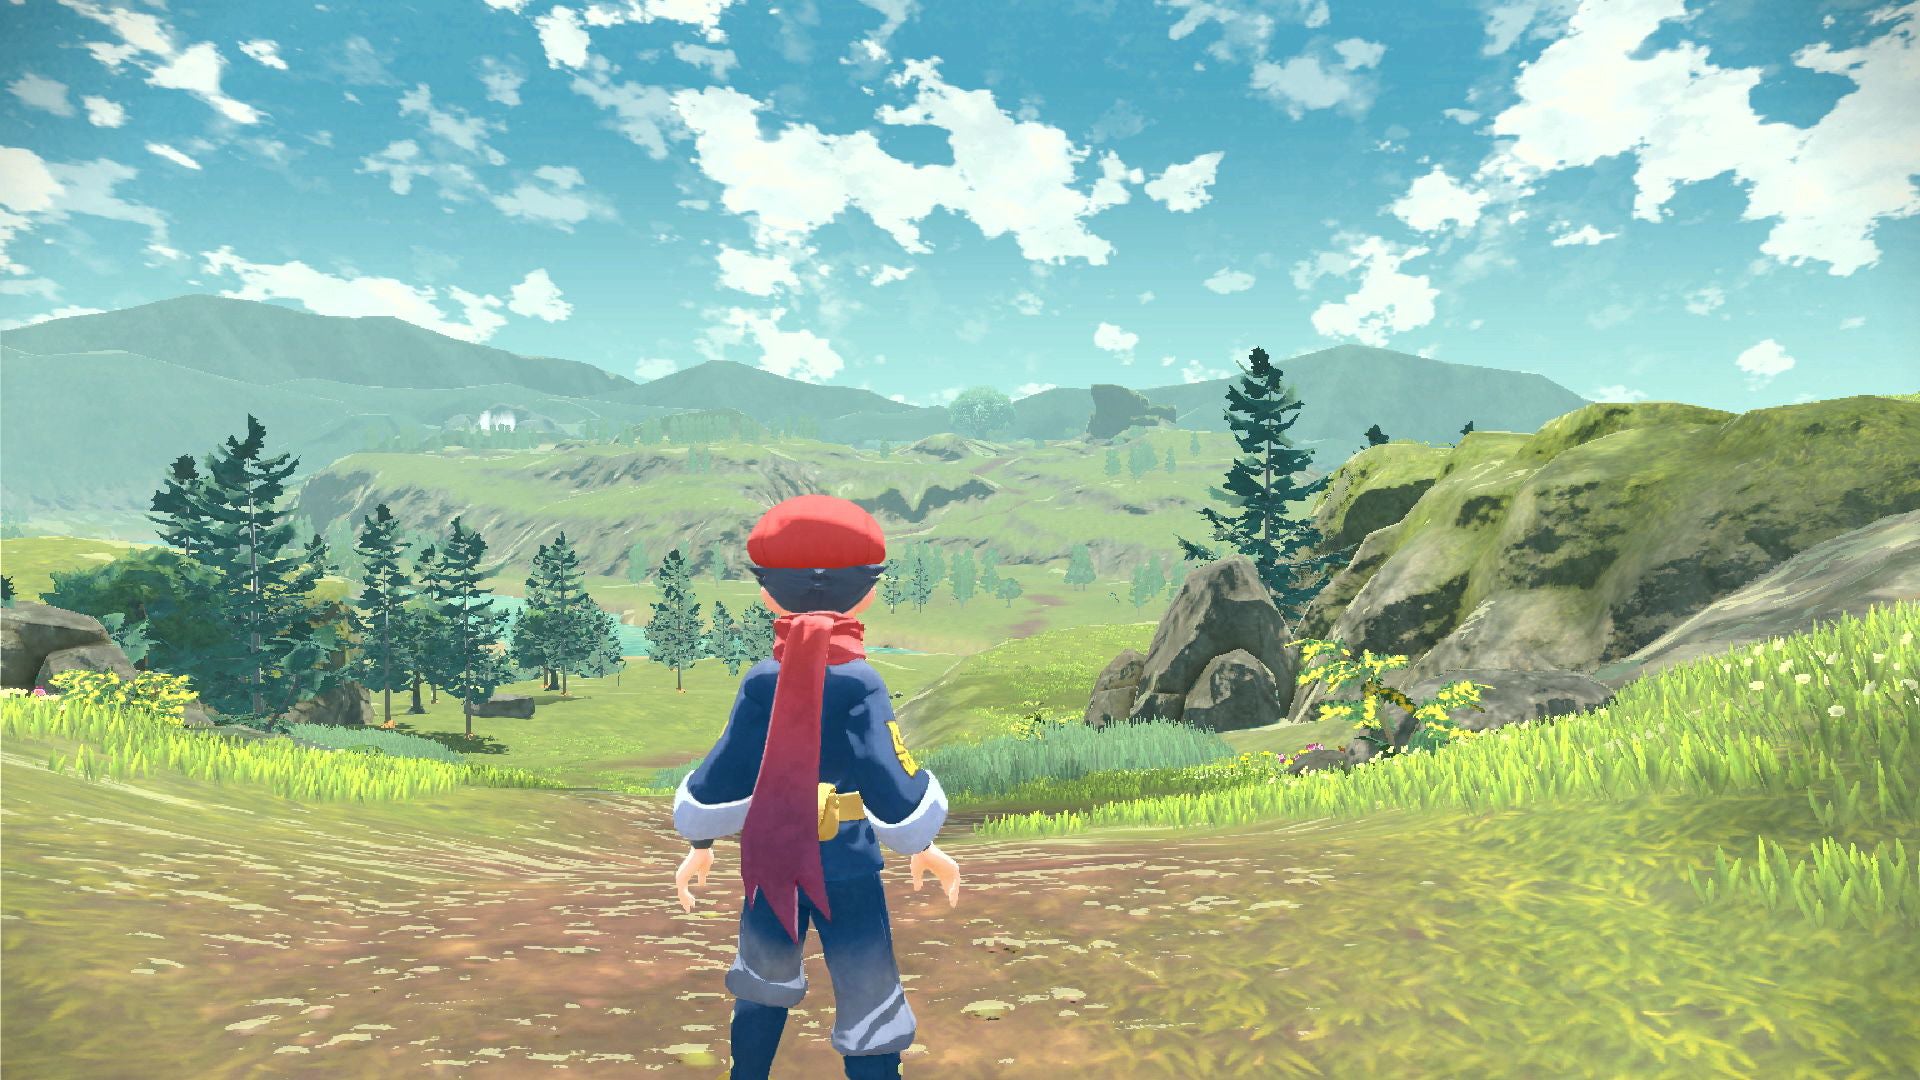 Pokemon Legends: Arceus is a 3D action RPG that's launching next year